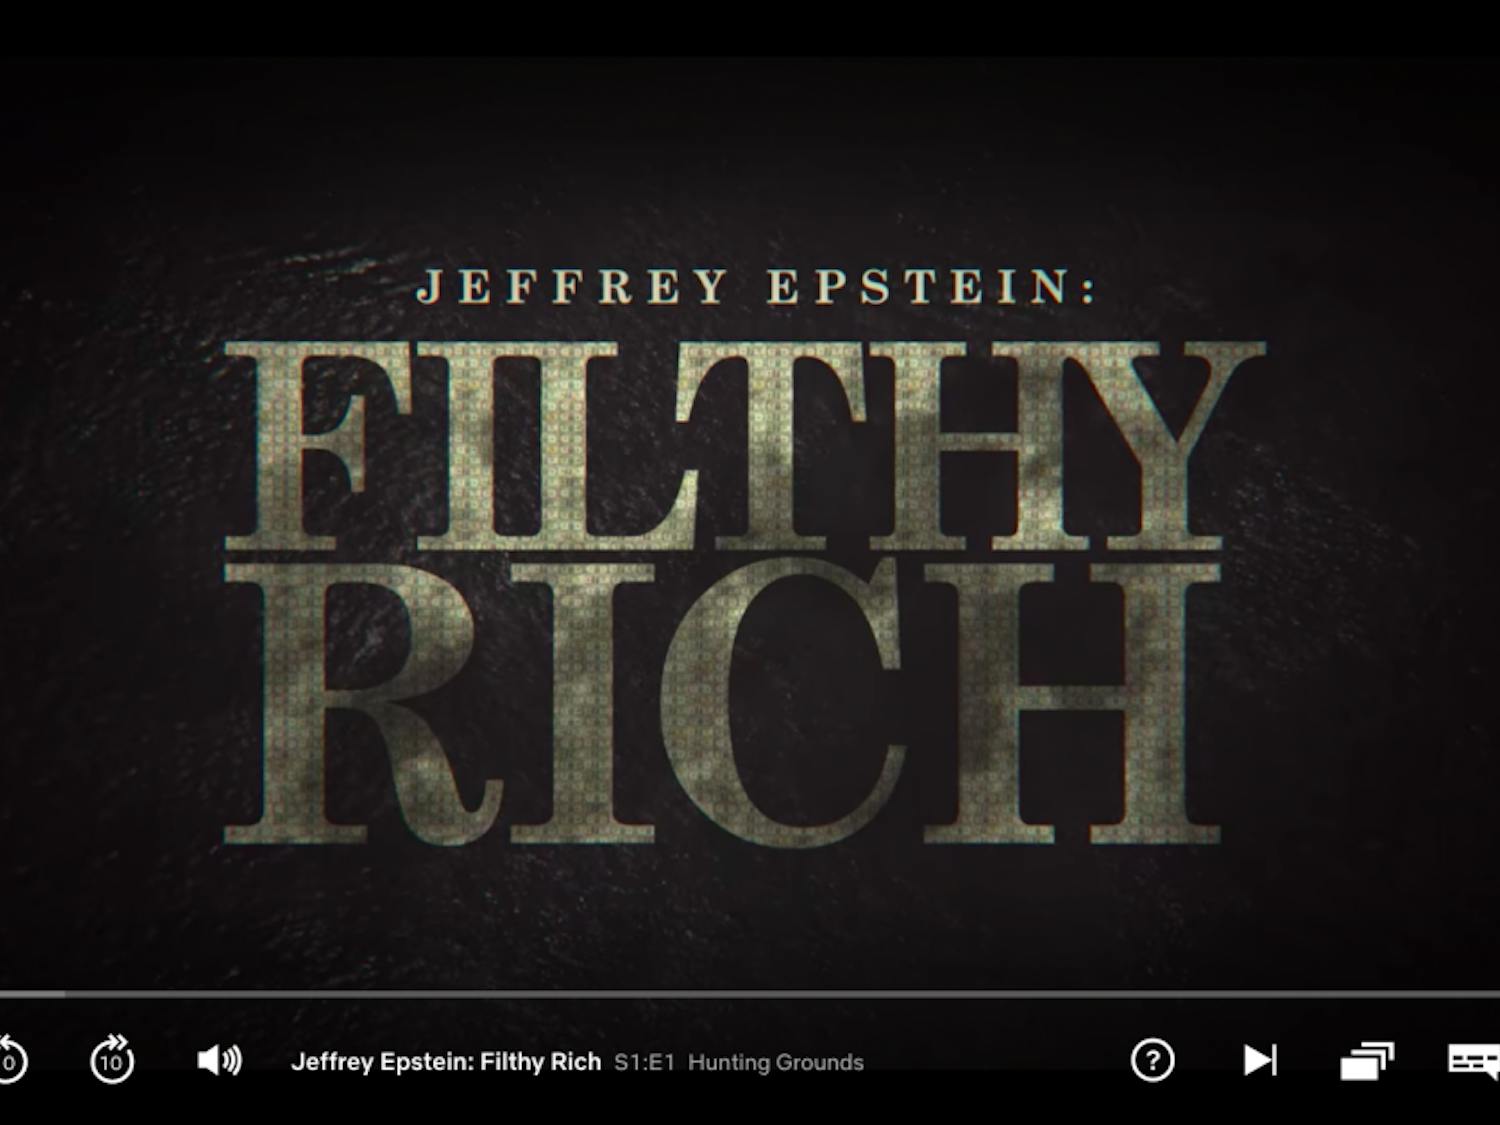 The new Netflix docuseries "Jeffery Epstein: Filthy Rich" was released on May 27.&nbsp;